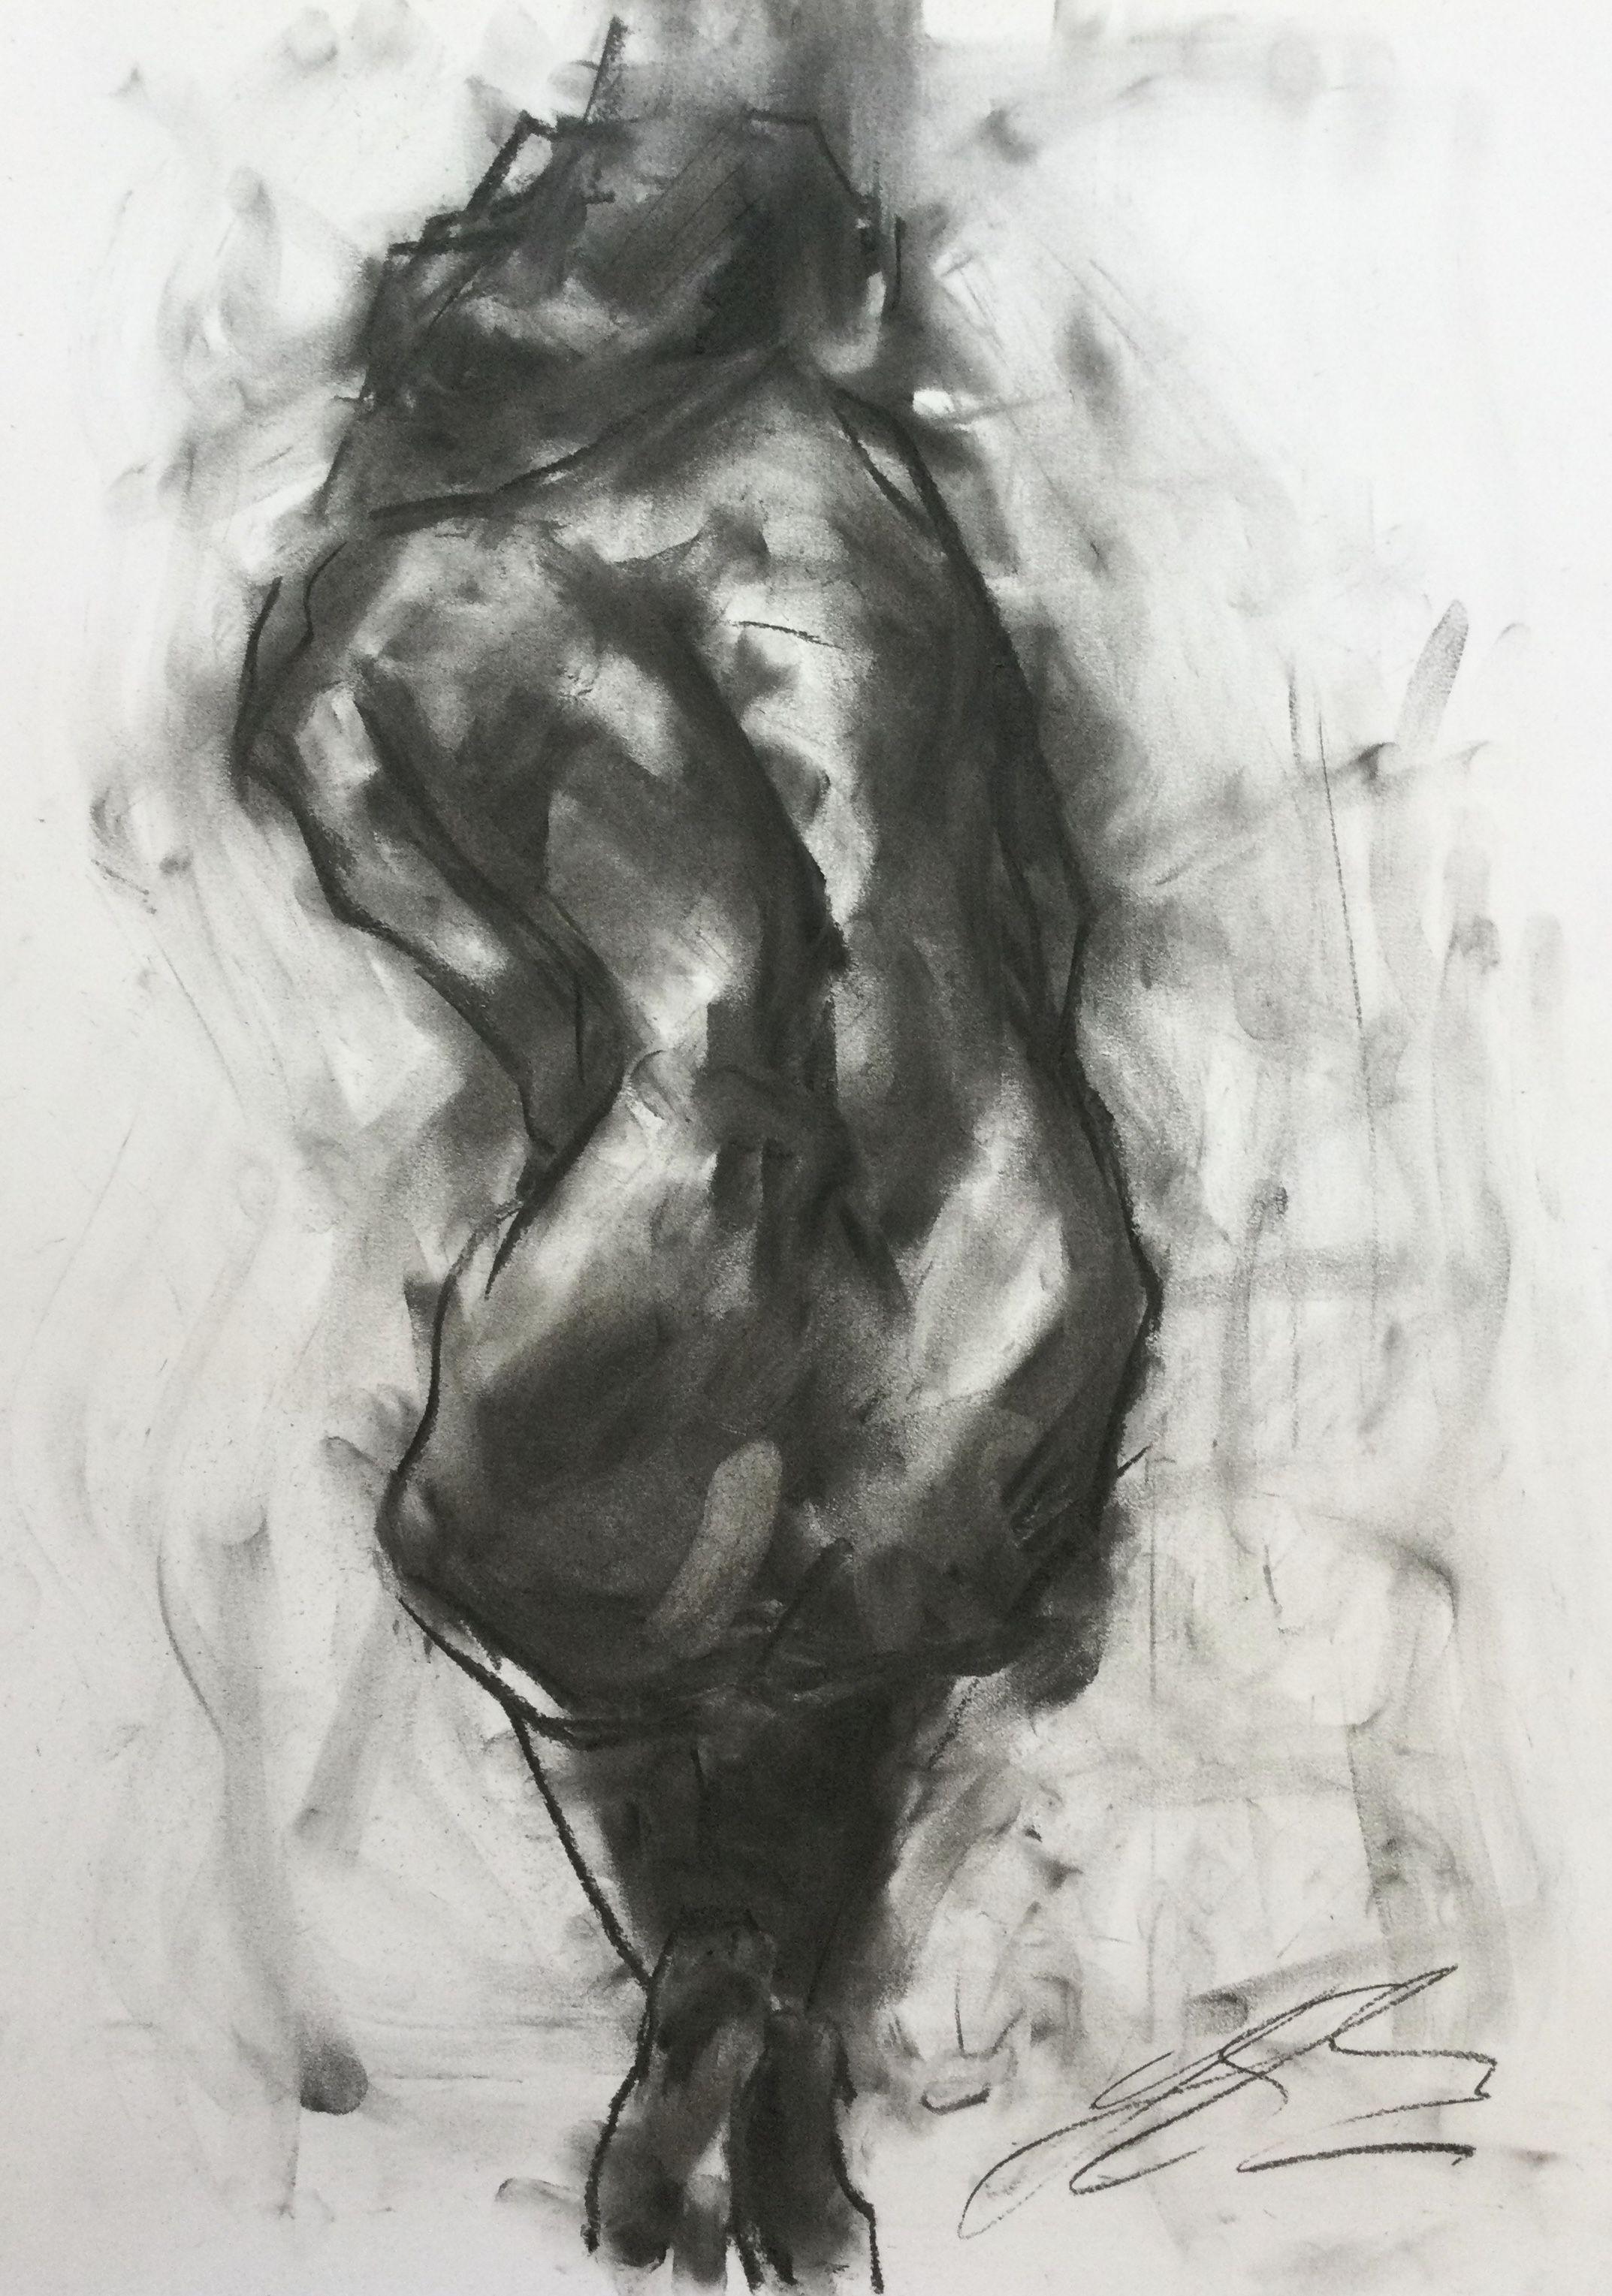 Cost, Drawing, Charcoal on Paper - Art by James Shipton